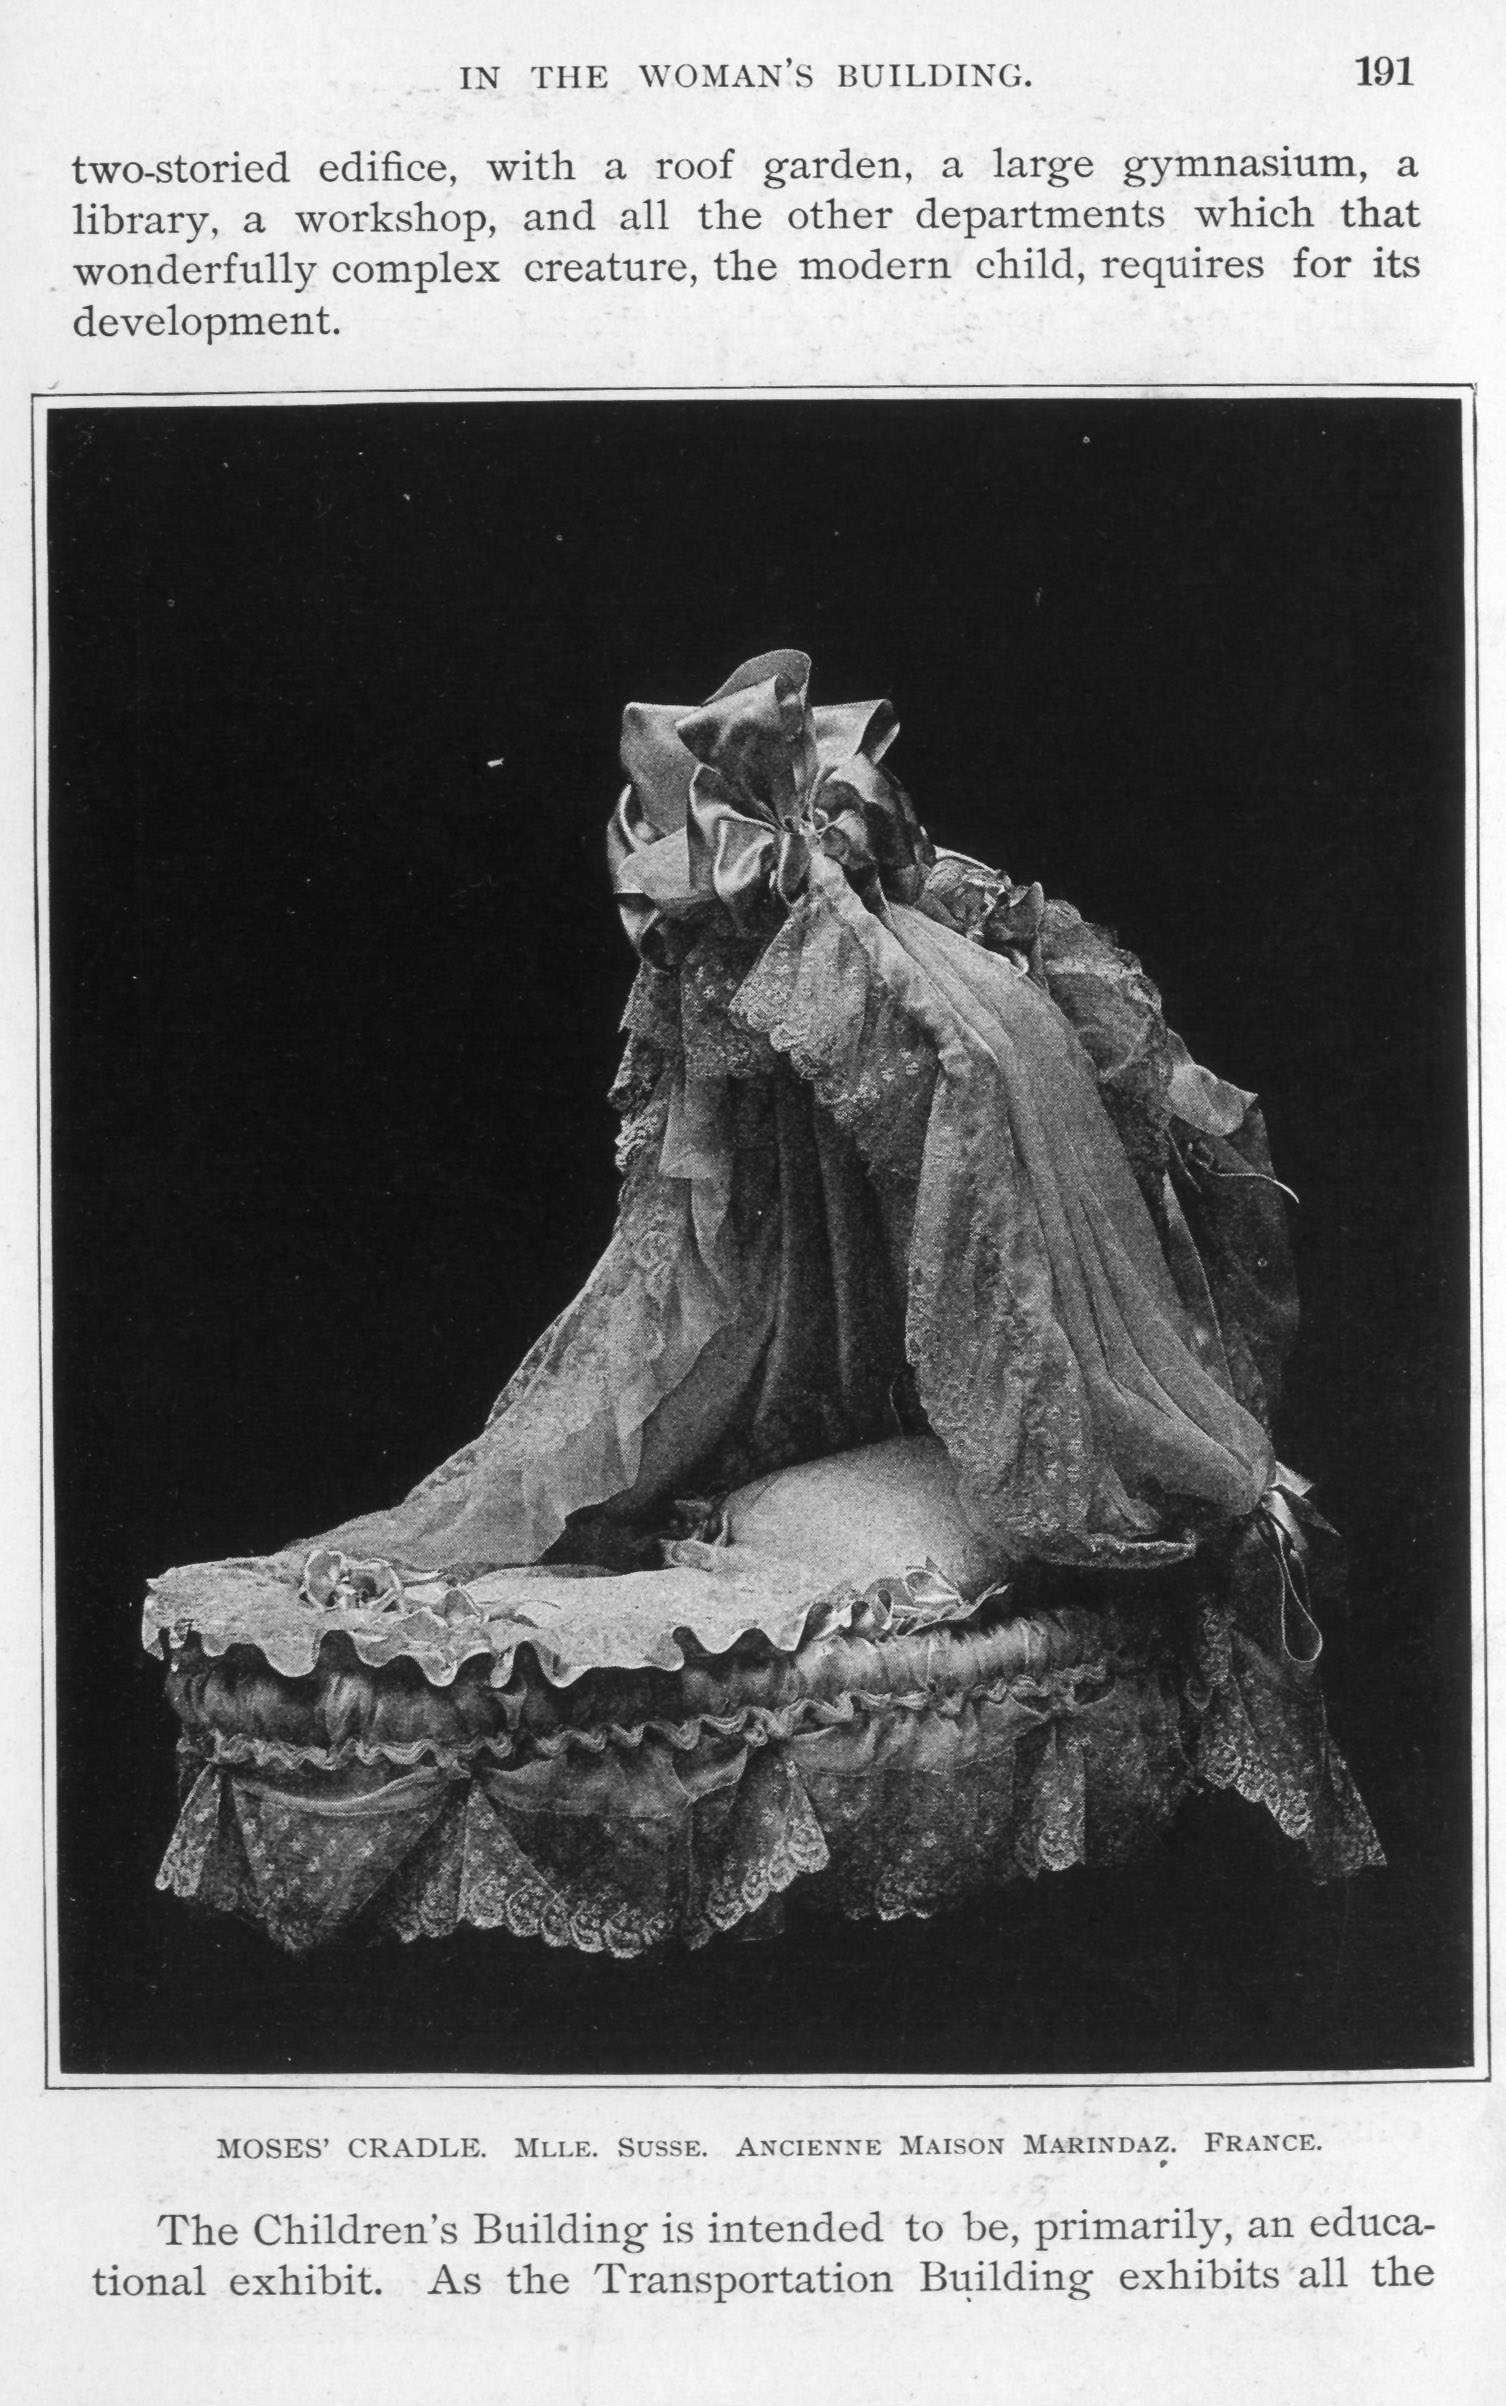 cradle with bonnet, all decorated with lace and ribbon